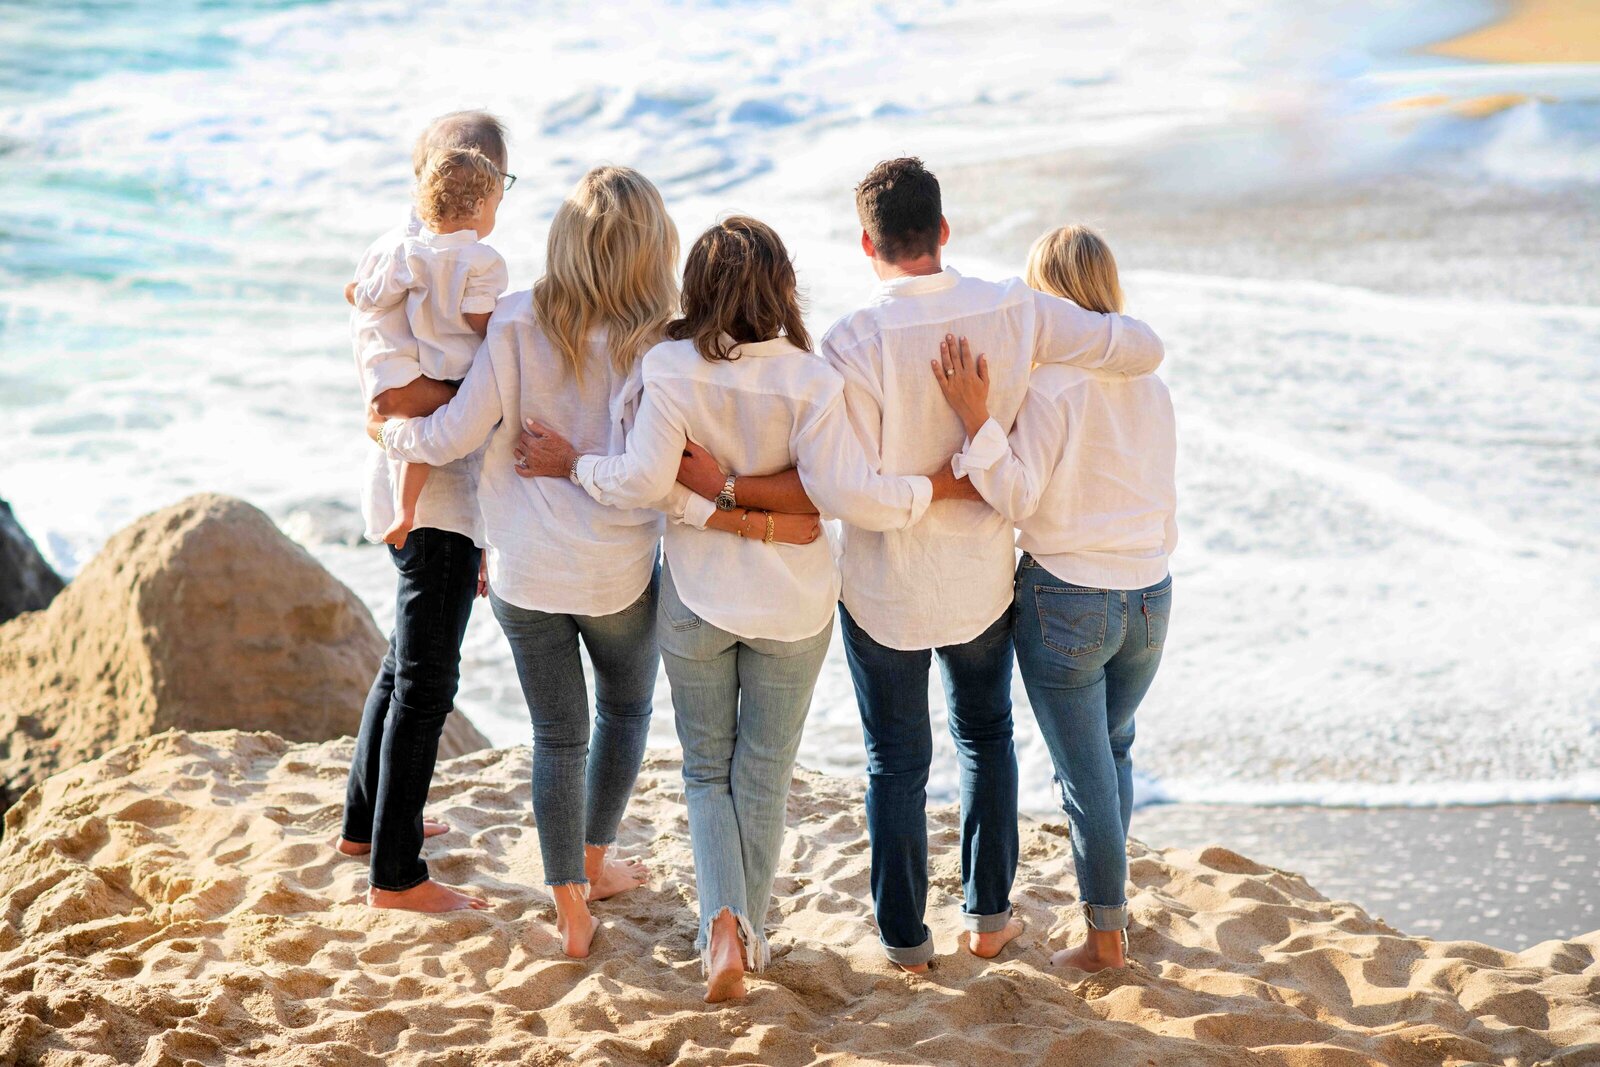 Maria-McCarthy-Photography-family-portrait-candid-beach